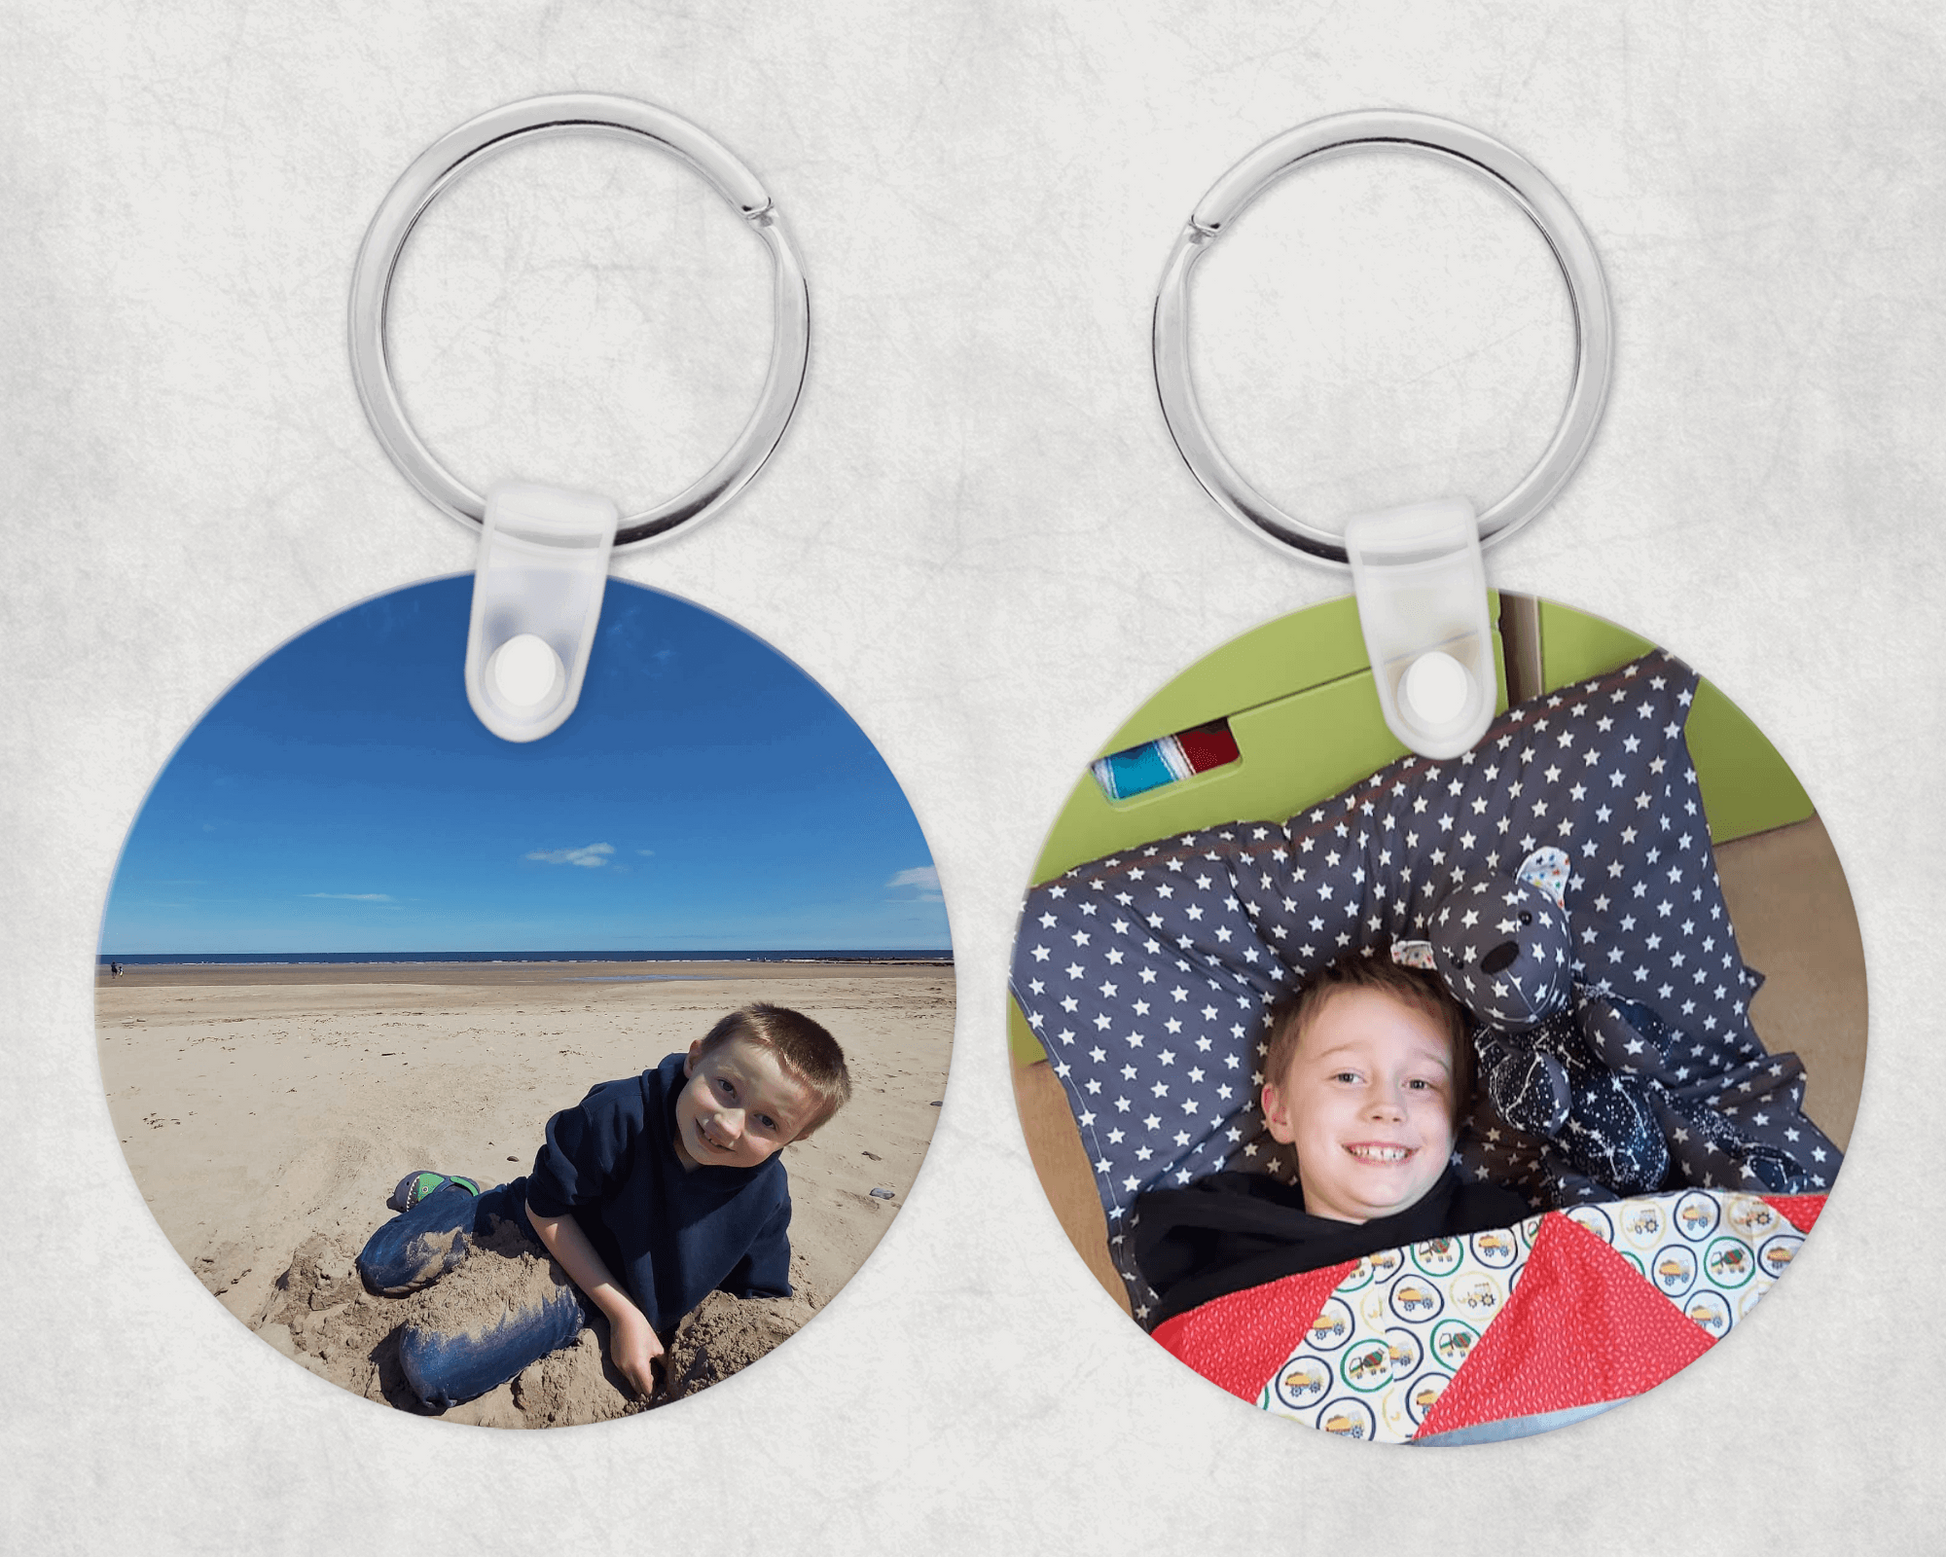 Photo keyring - Round double sided - Sew Tilley